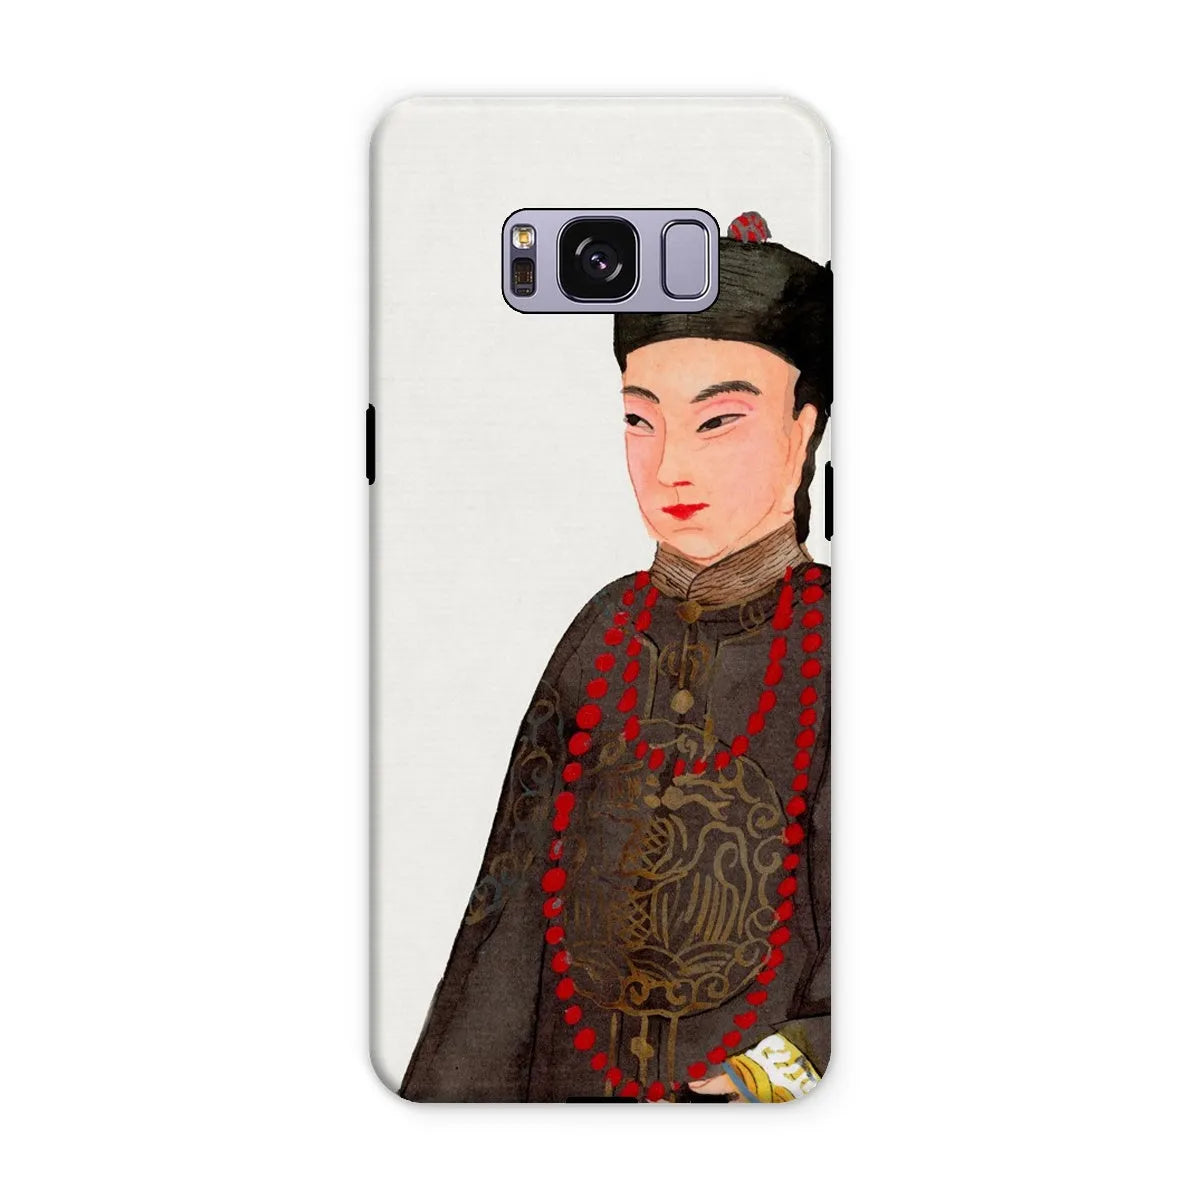 Emperor’s Courtier - Chinese Manchu Aesthetic Art Phone Case - Samsung Galaxy S8 Plus / Matte - Mobile Phone Cases